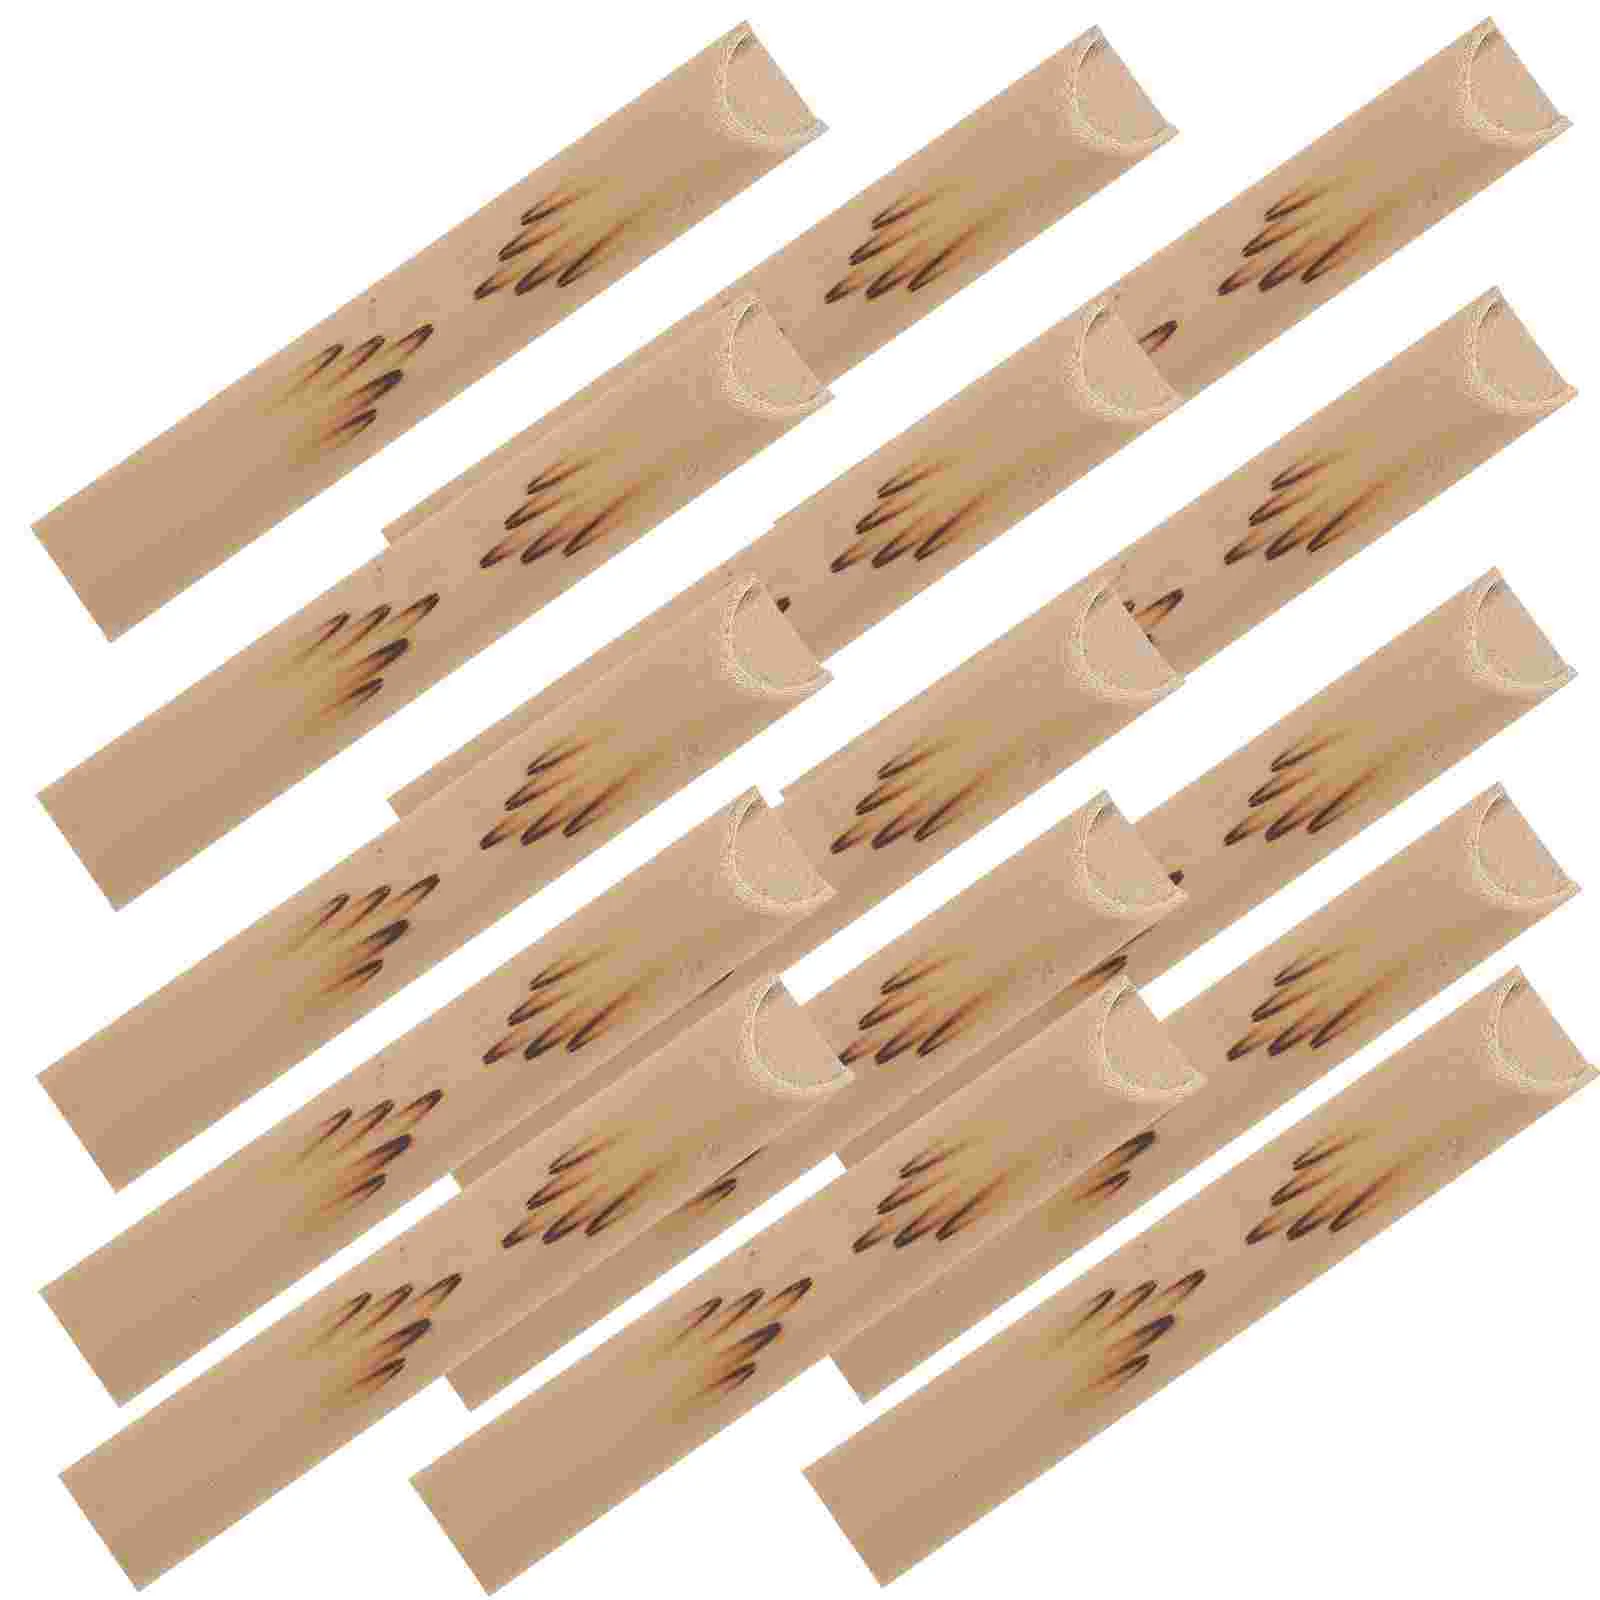 

15pcs Handcrafts Bamboo Whistle Mini Music Duck Whistle Flute Small Instrument for Kids